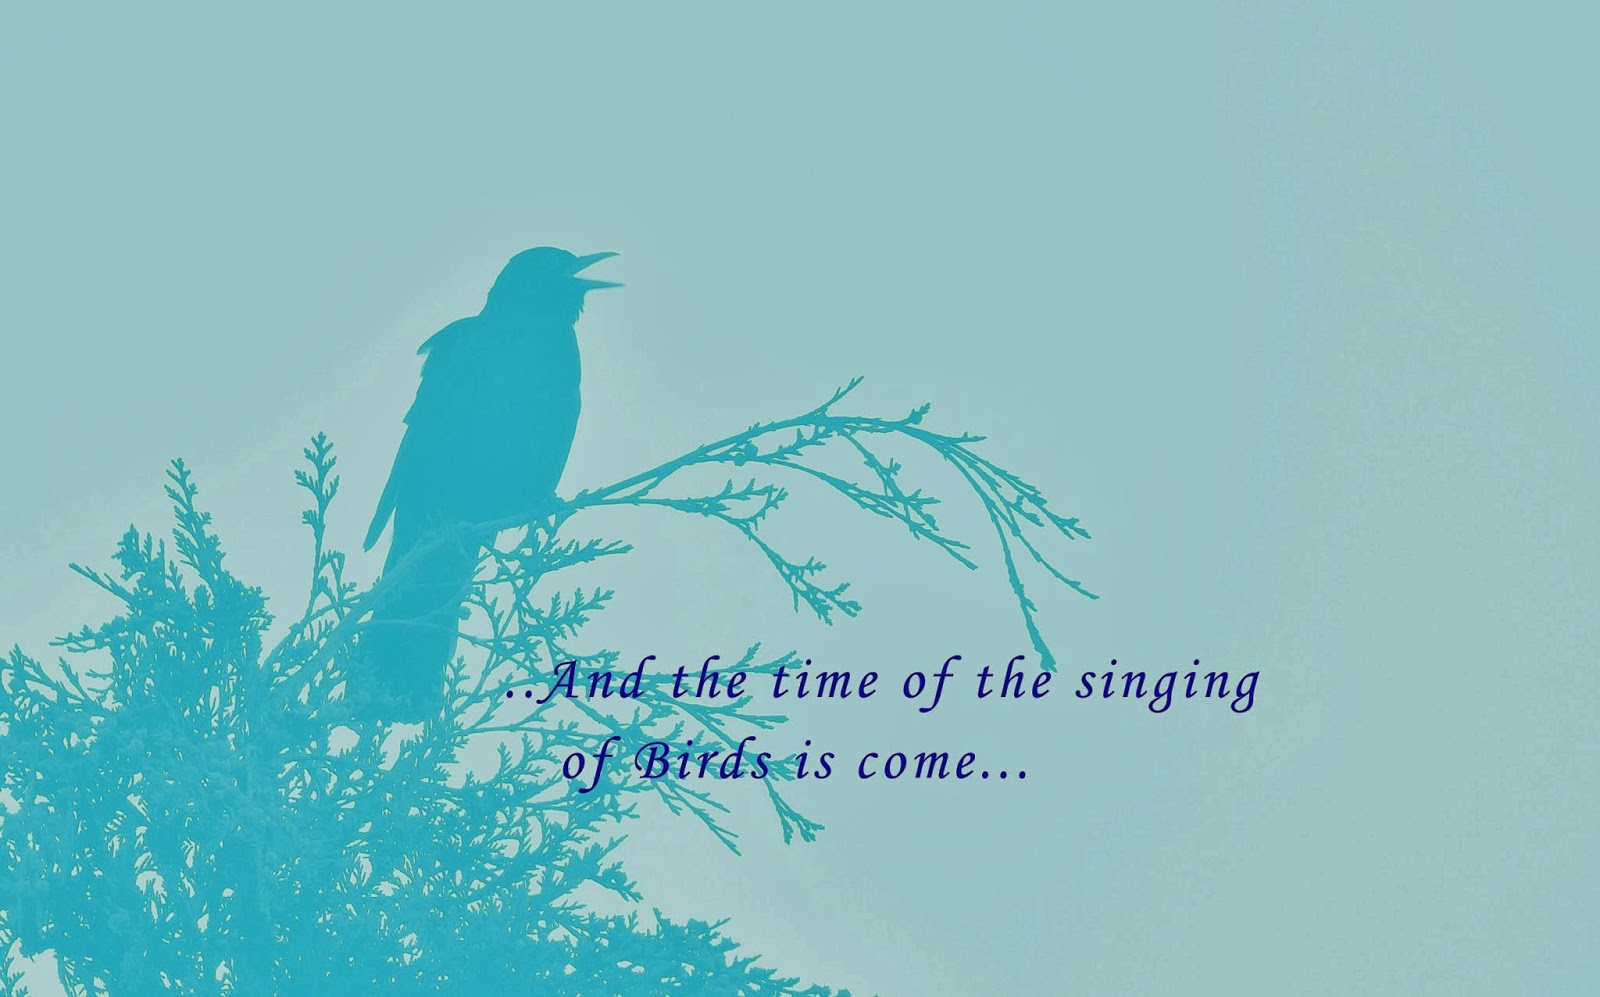 The+time+of+the+singing.jpg